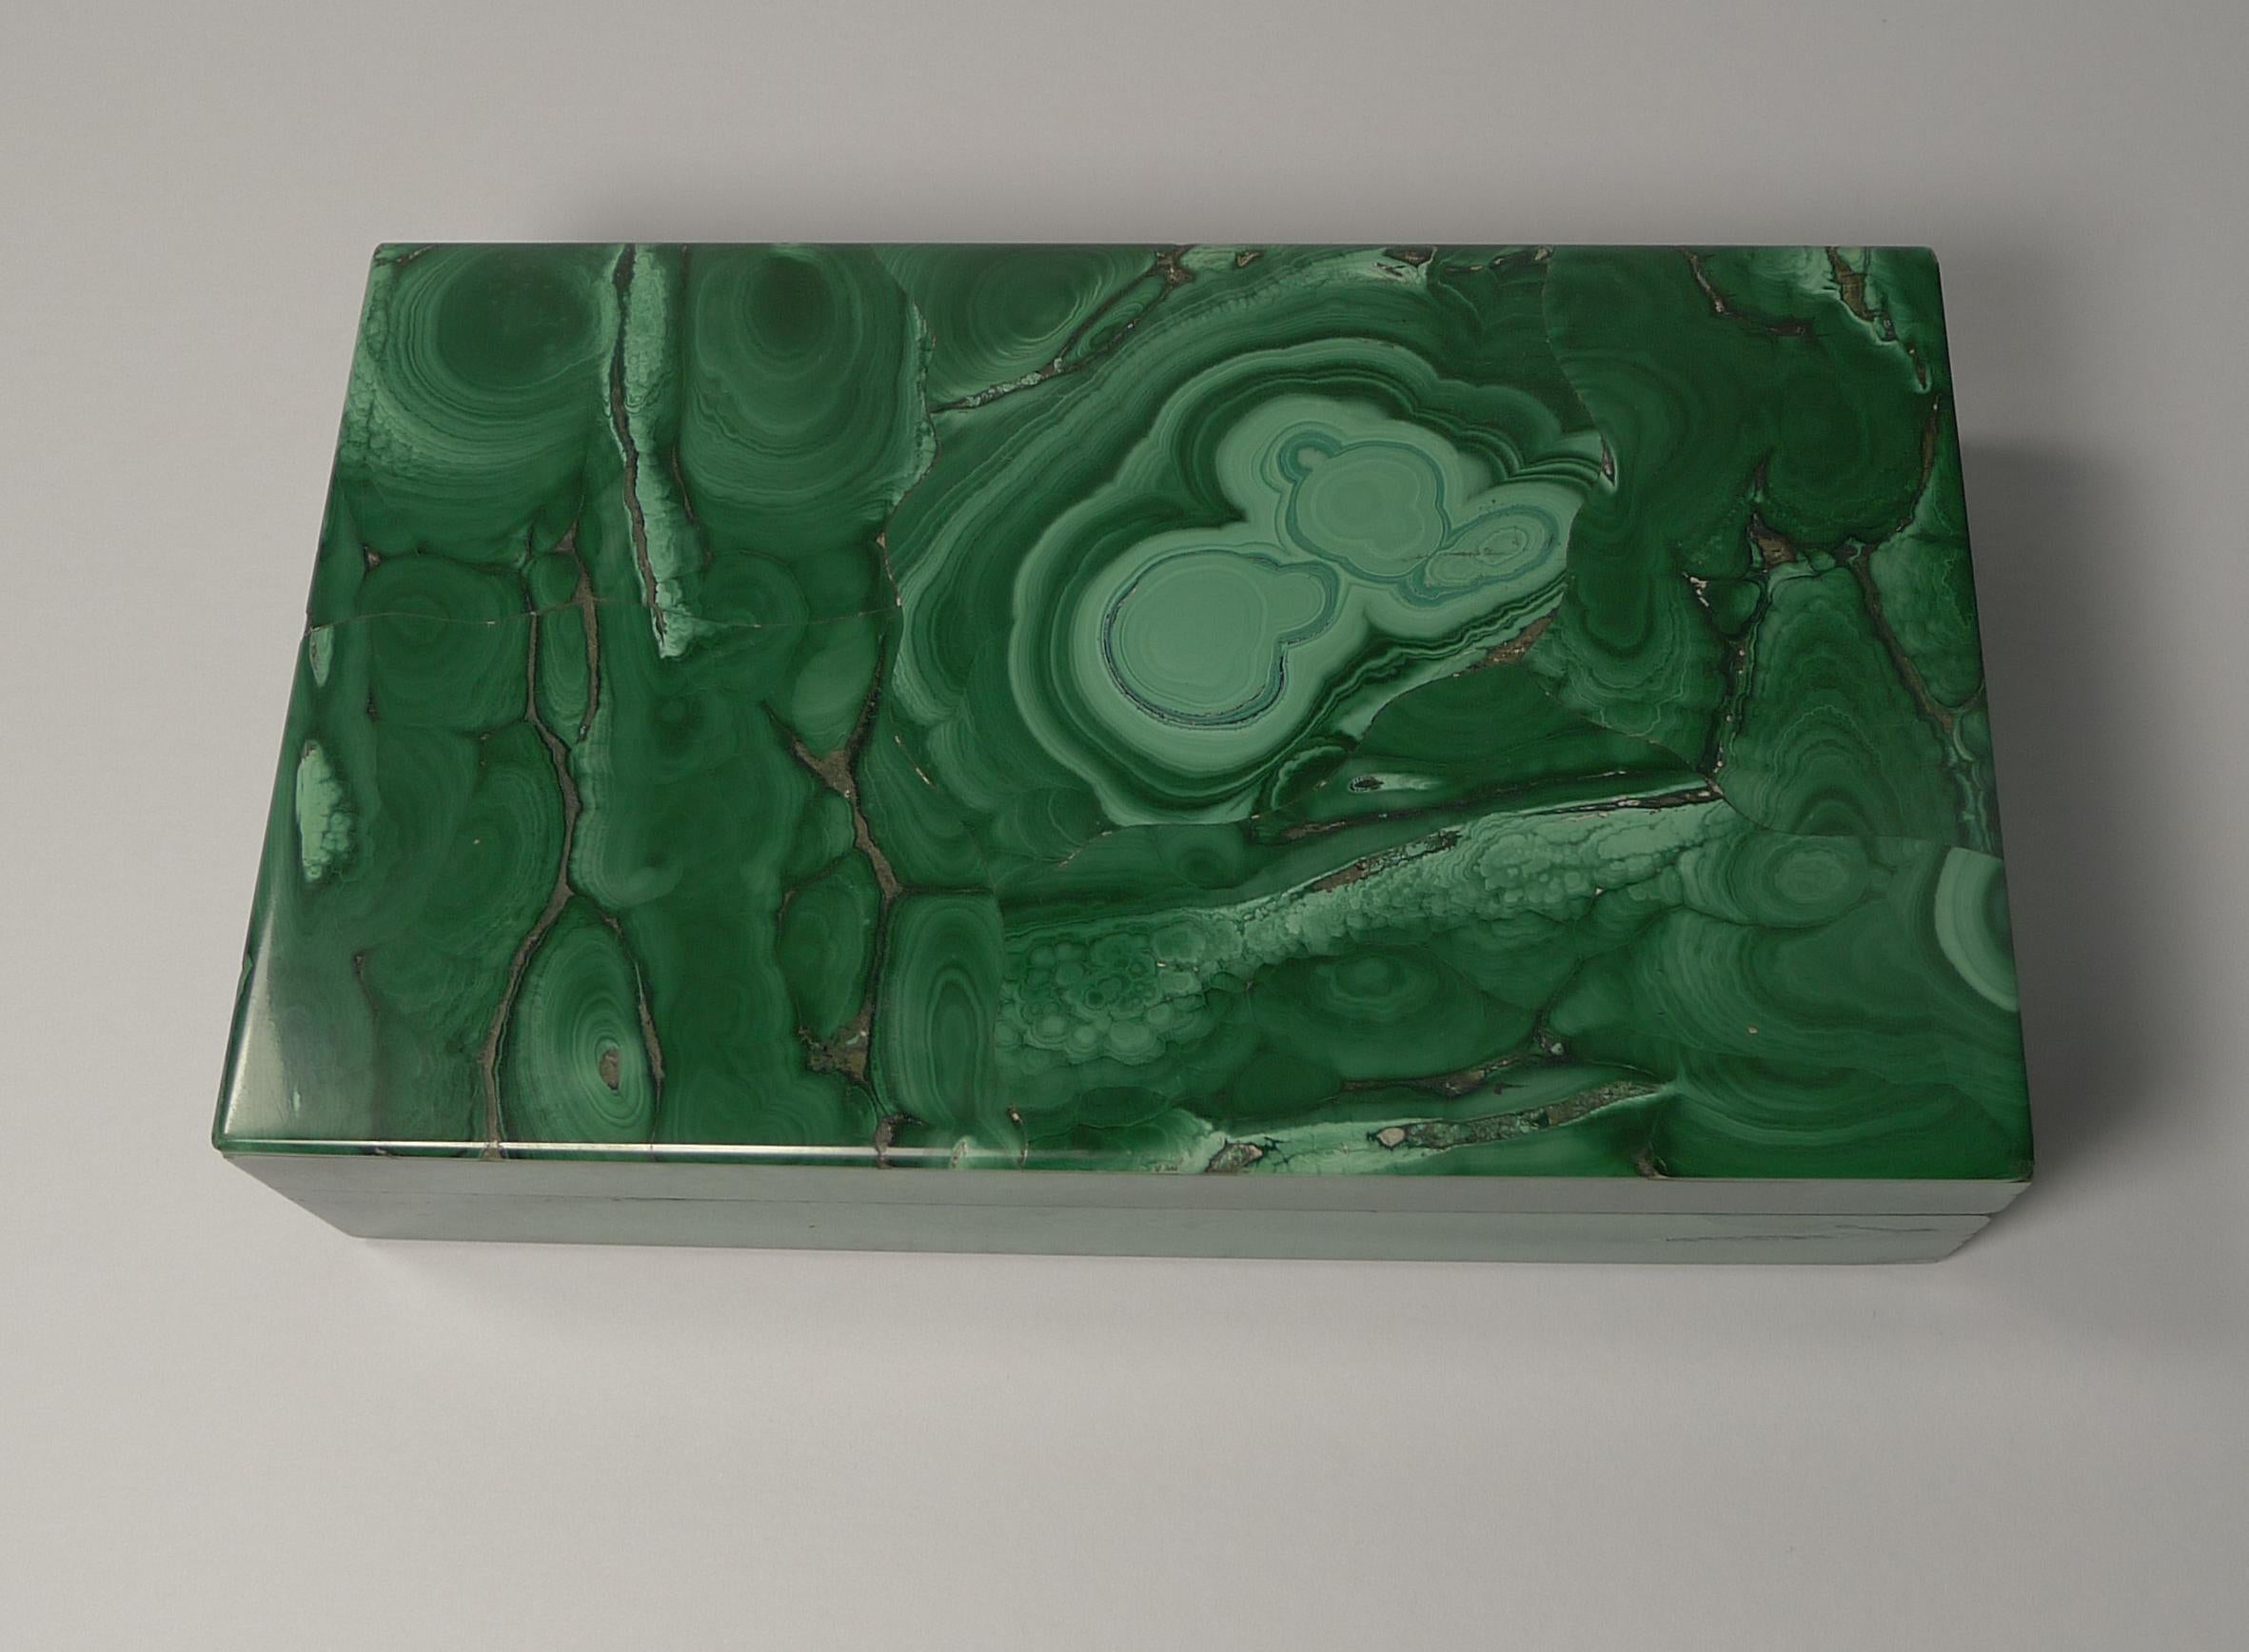 A wonderful example of a Mid-Century Modern malachite box in a lovely simple Art Deco design.

The malachite is striking and in magnificent undamaged condition. The hinged lid is made from solid 800 silver and both the top and bottom is trimmed in